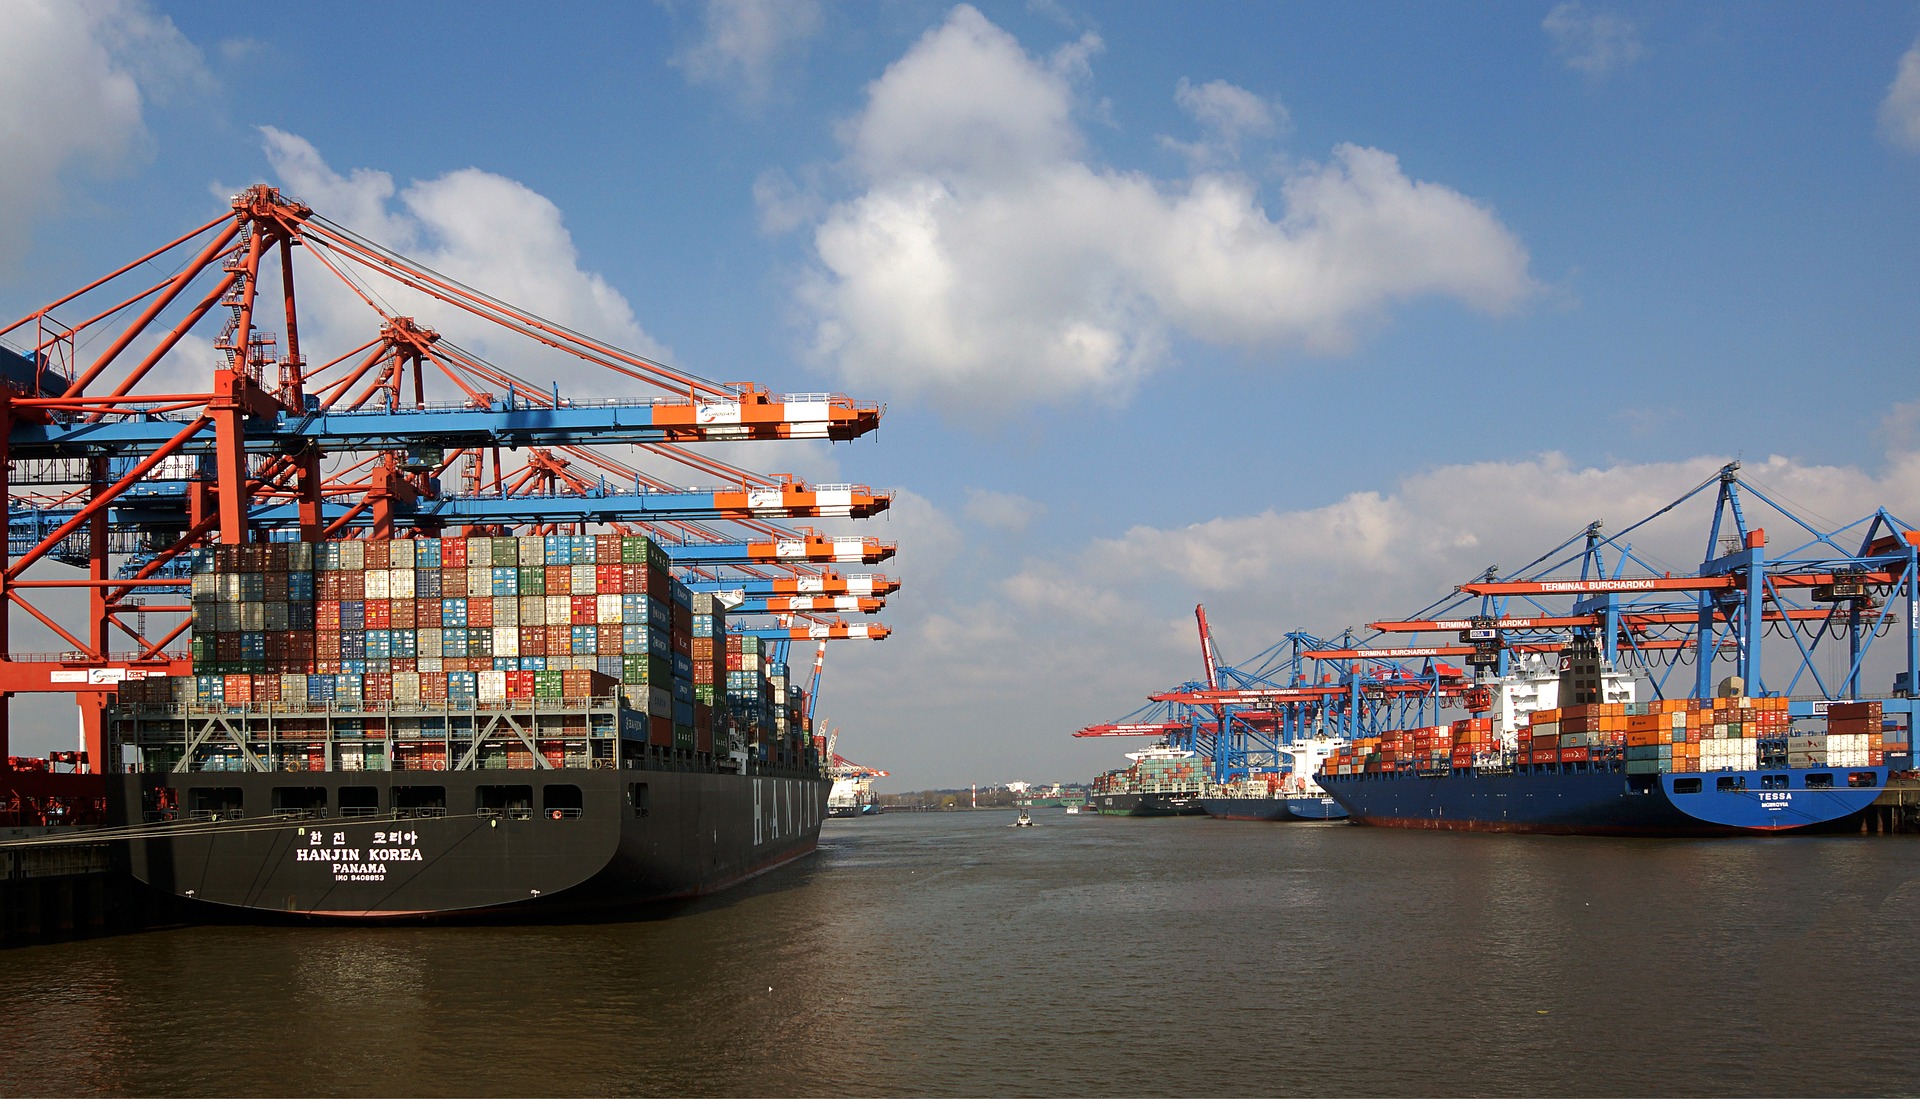 Is shipping goods environmental friendly?